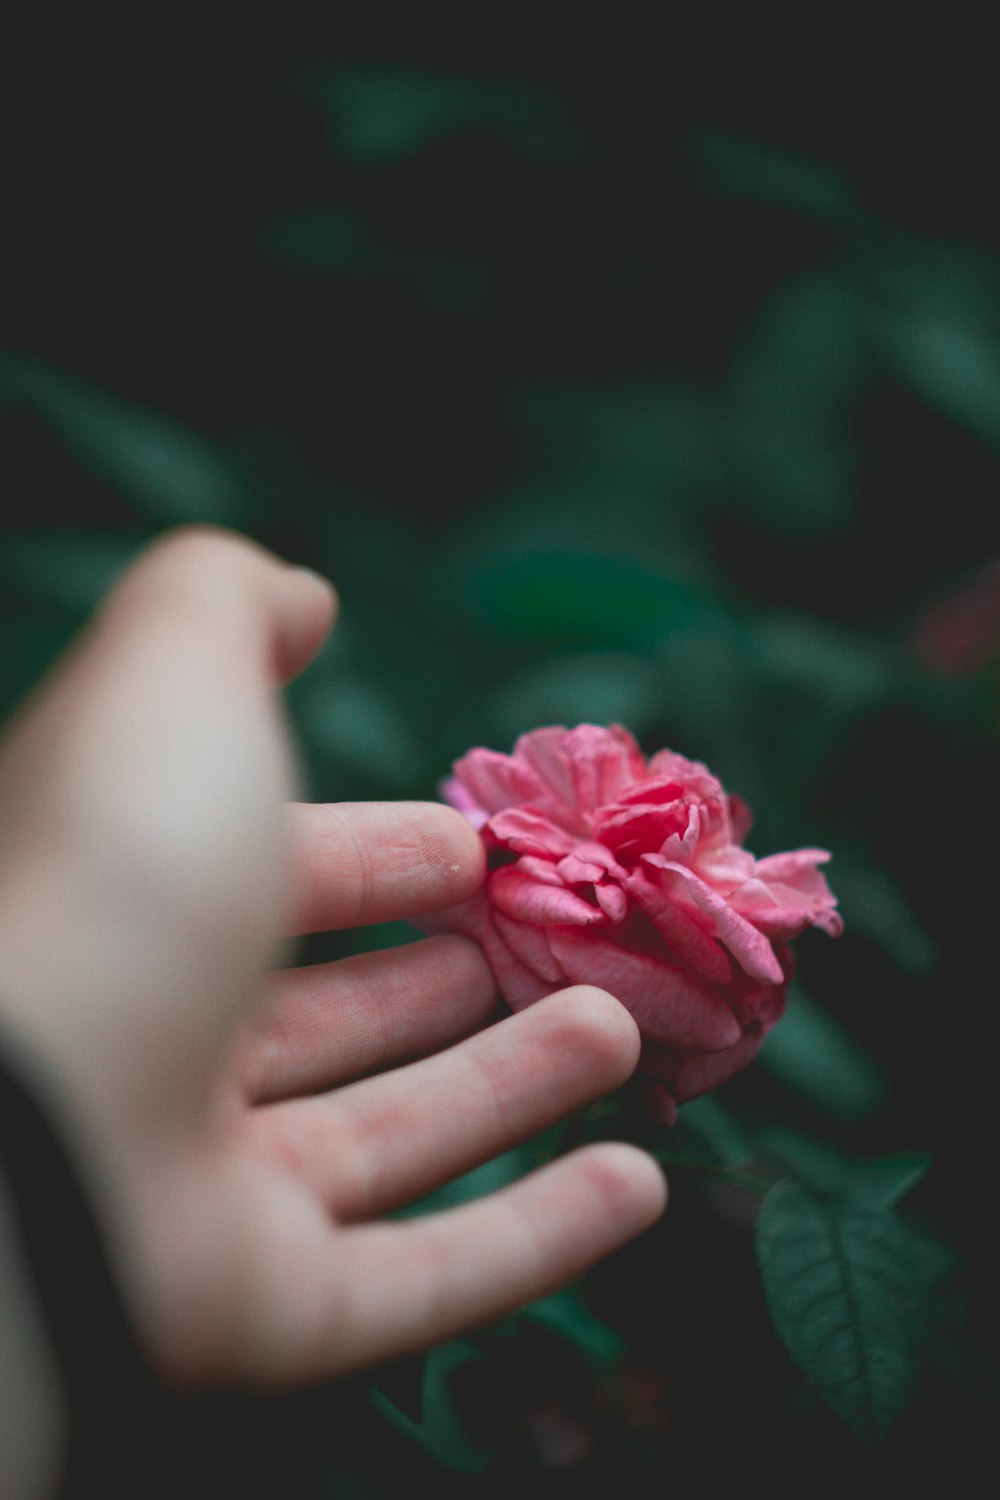 person holding red petaled flower